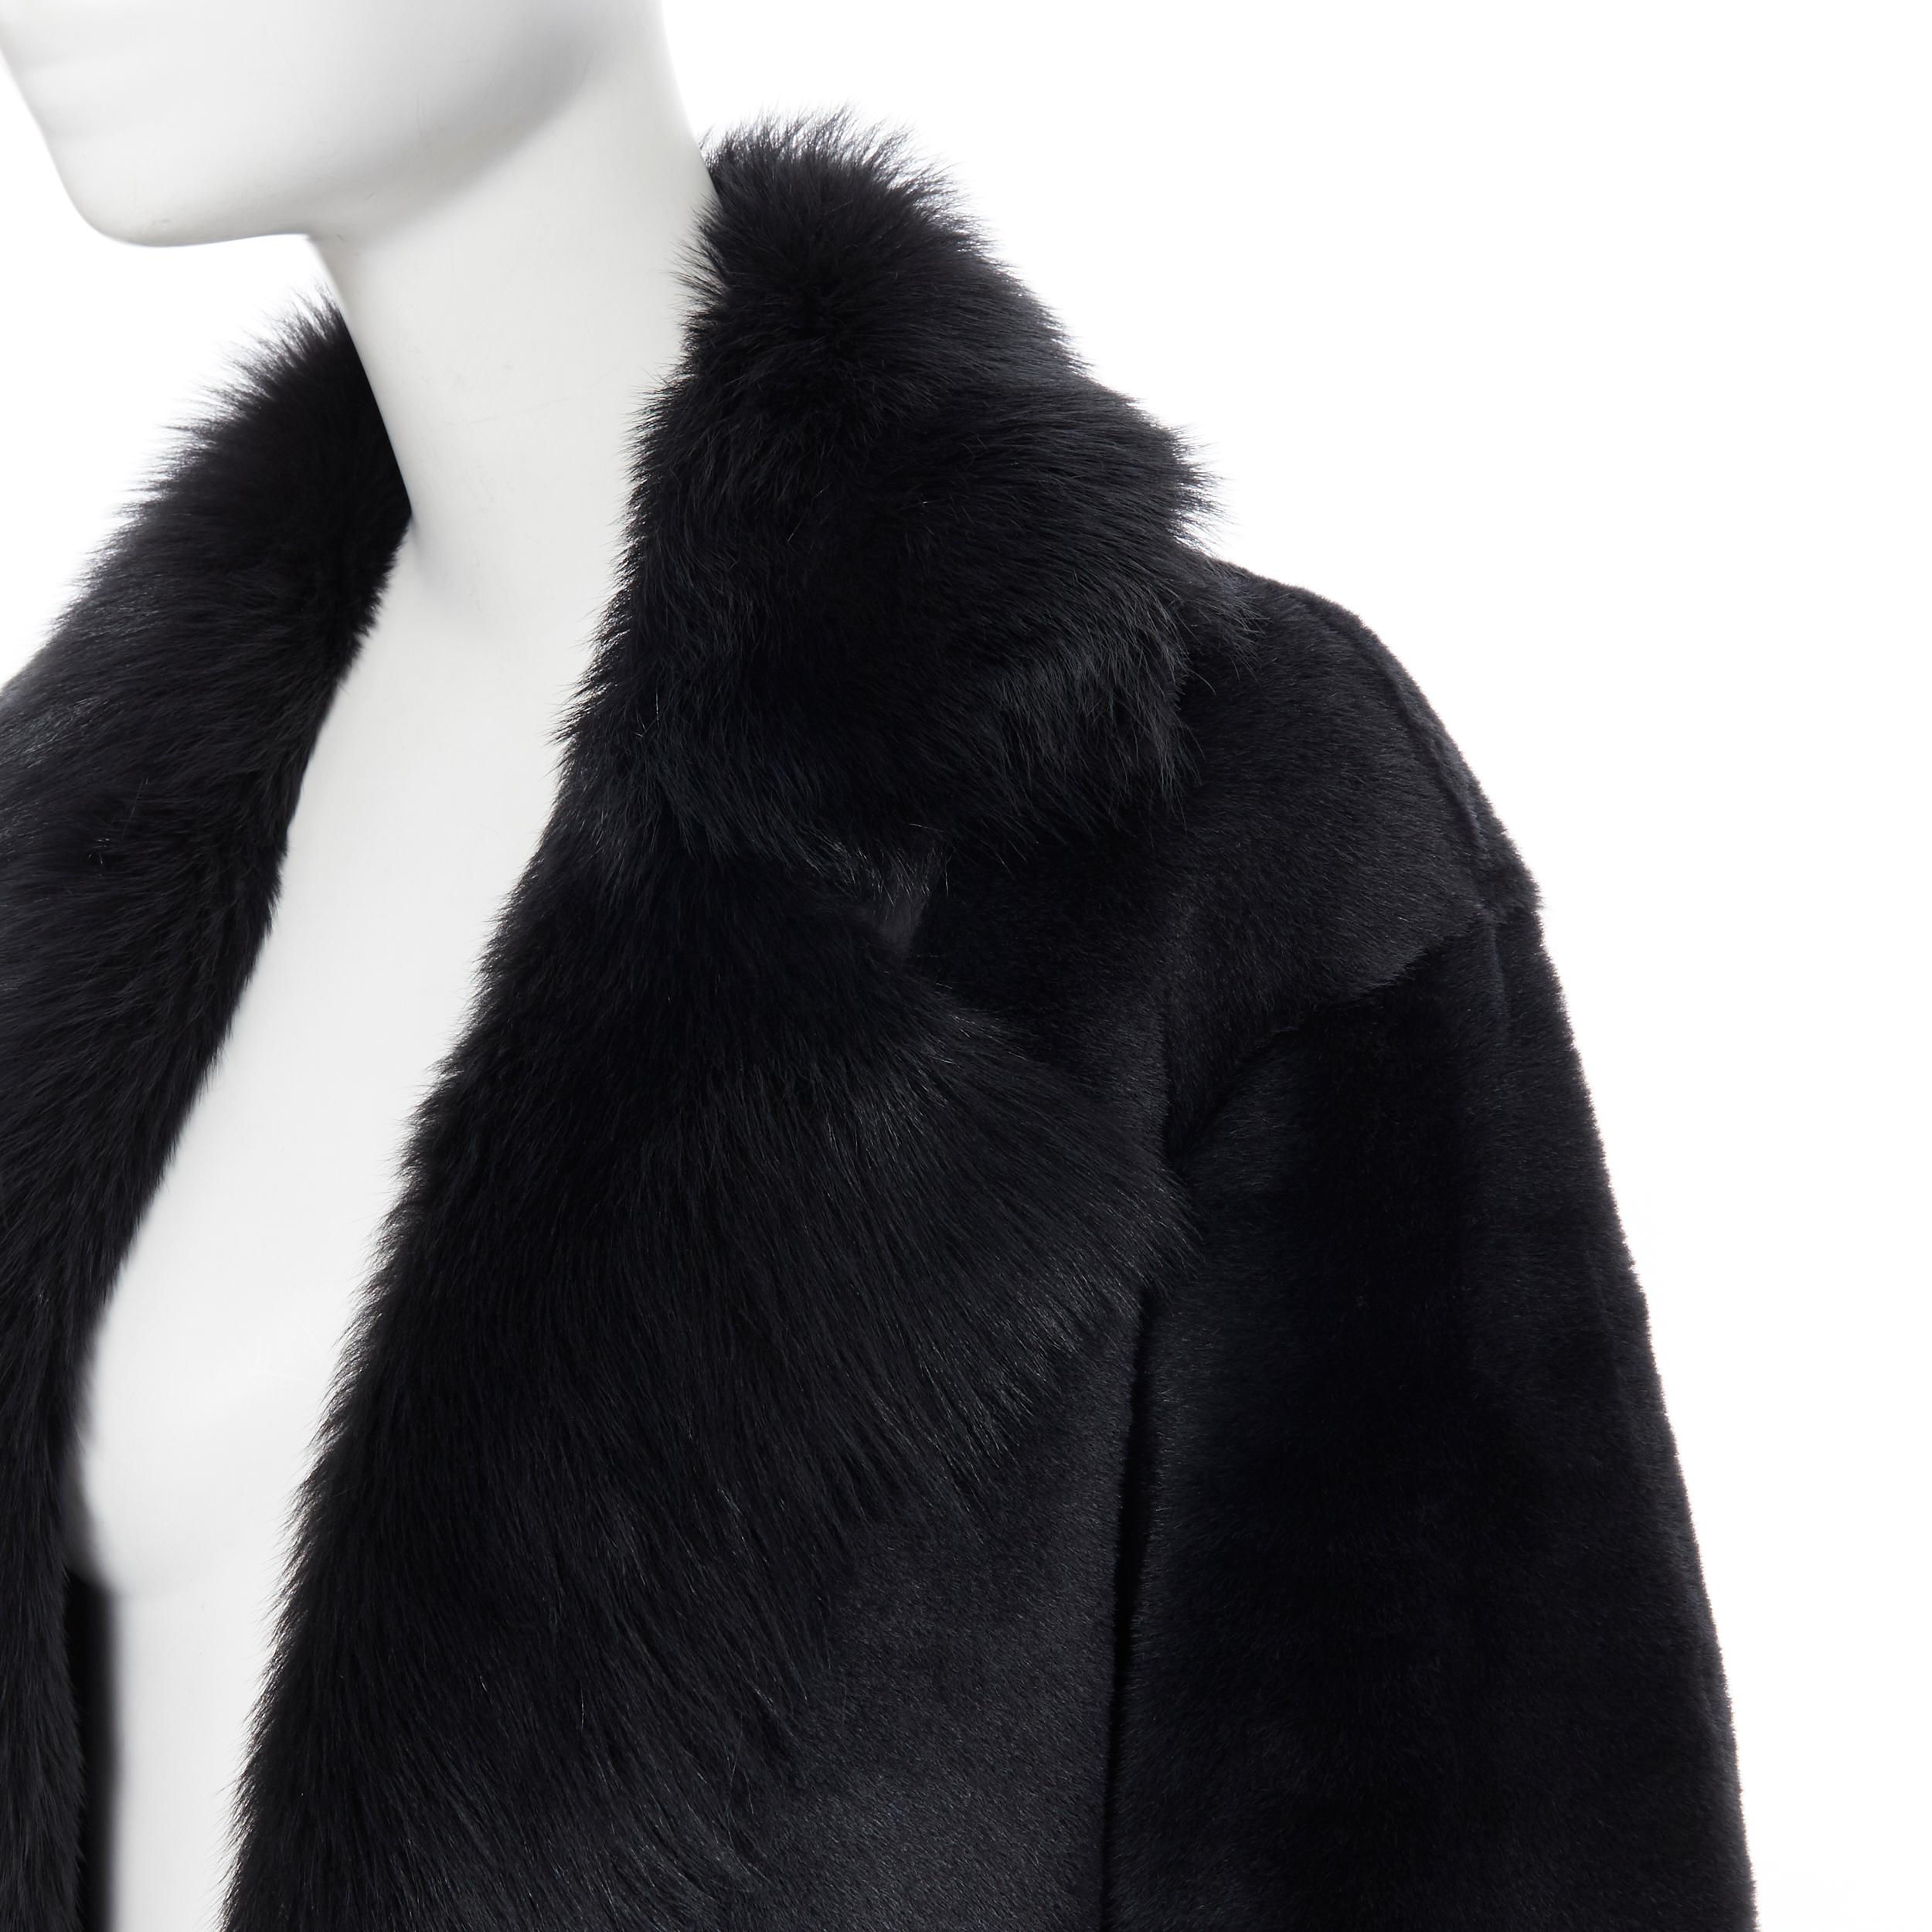 THEORY black dyed shearling lamb genuine fur leather oversized winter coat XS
Brand: Theory
Model Name / Style: Fur coat
Material: Fur
Color: Black
Pattern: Solid
Closure: Hook & eye
Extra Detail: Dyed genuine shearling fur outer. Dual slit pockets